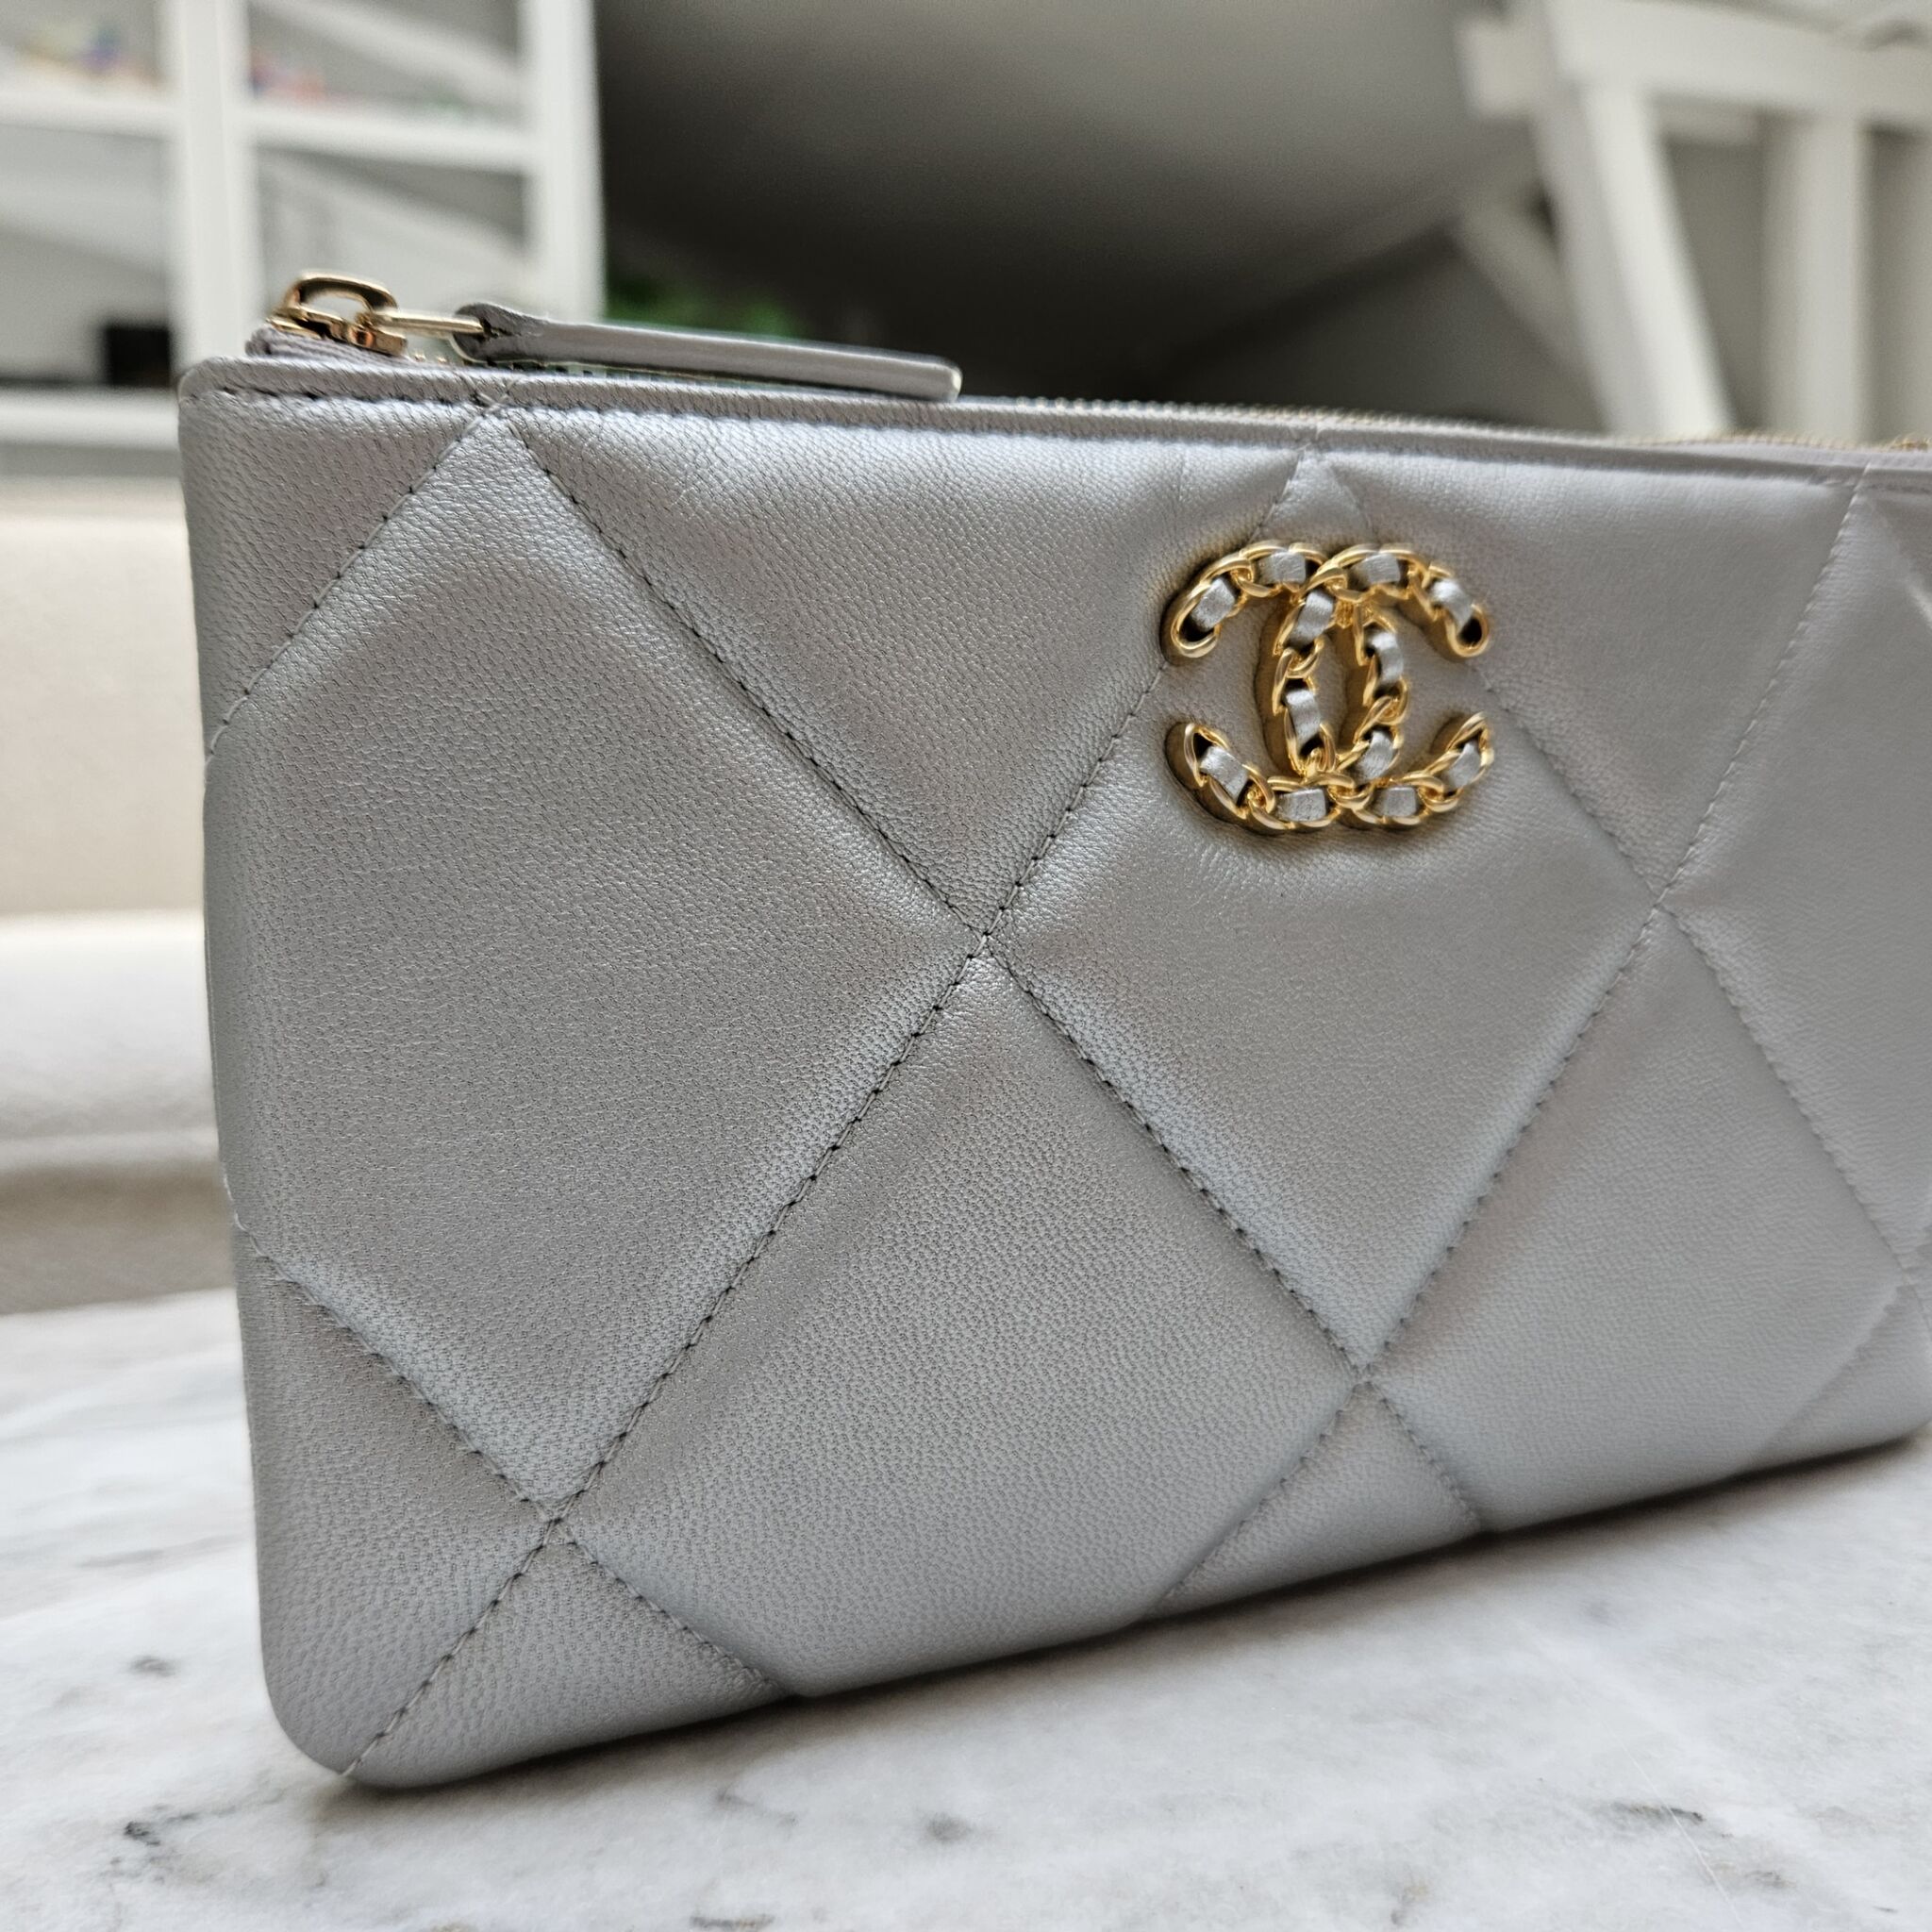 Chanel 19 Wristlet Pouch Review 